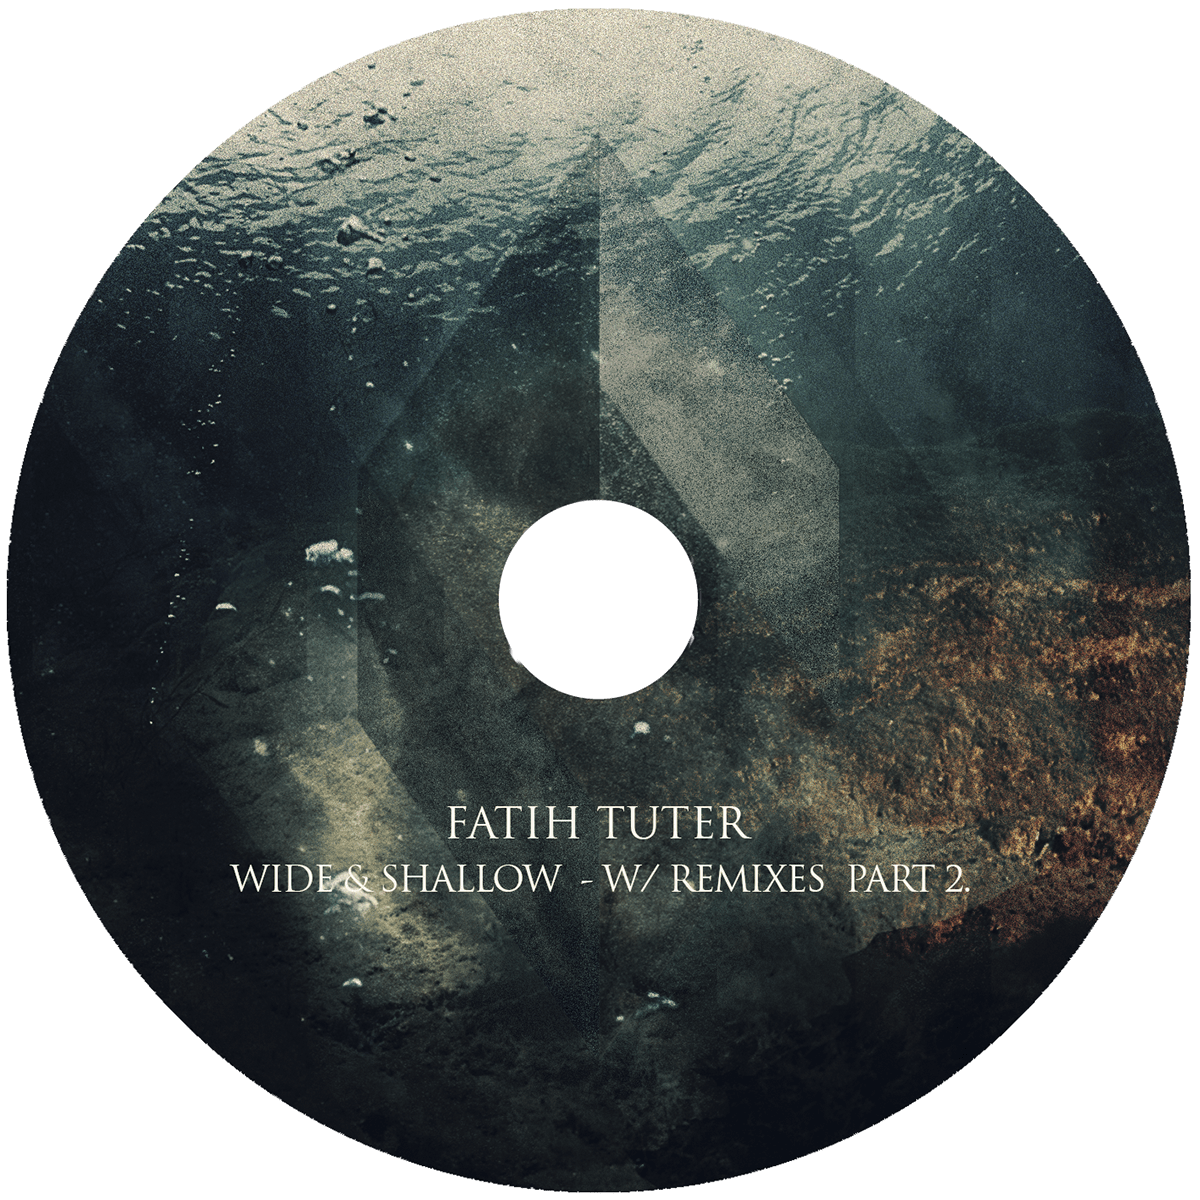 unknown tribe fatih Tuter wide shallow Remixes istanbul Album cover